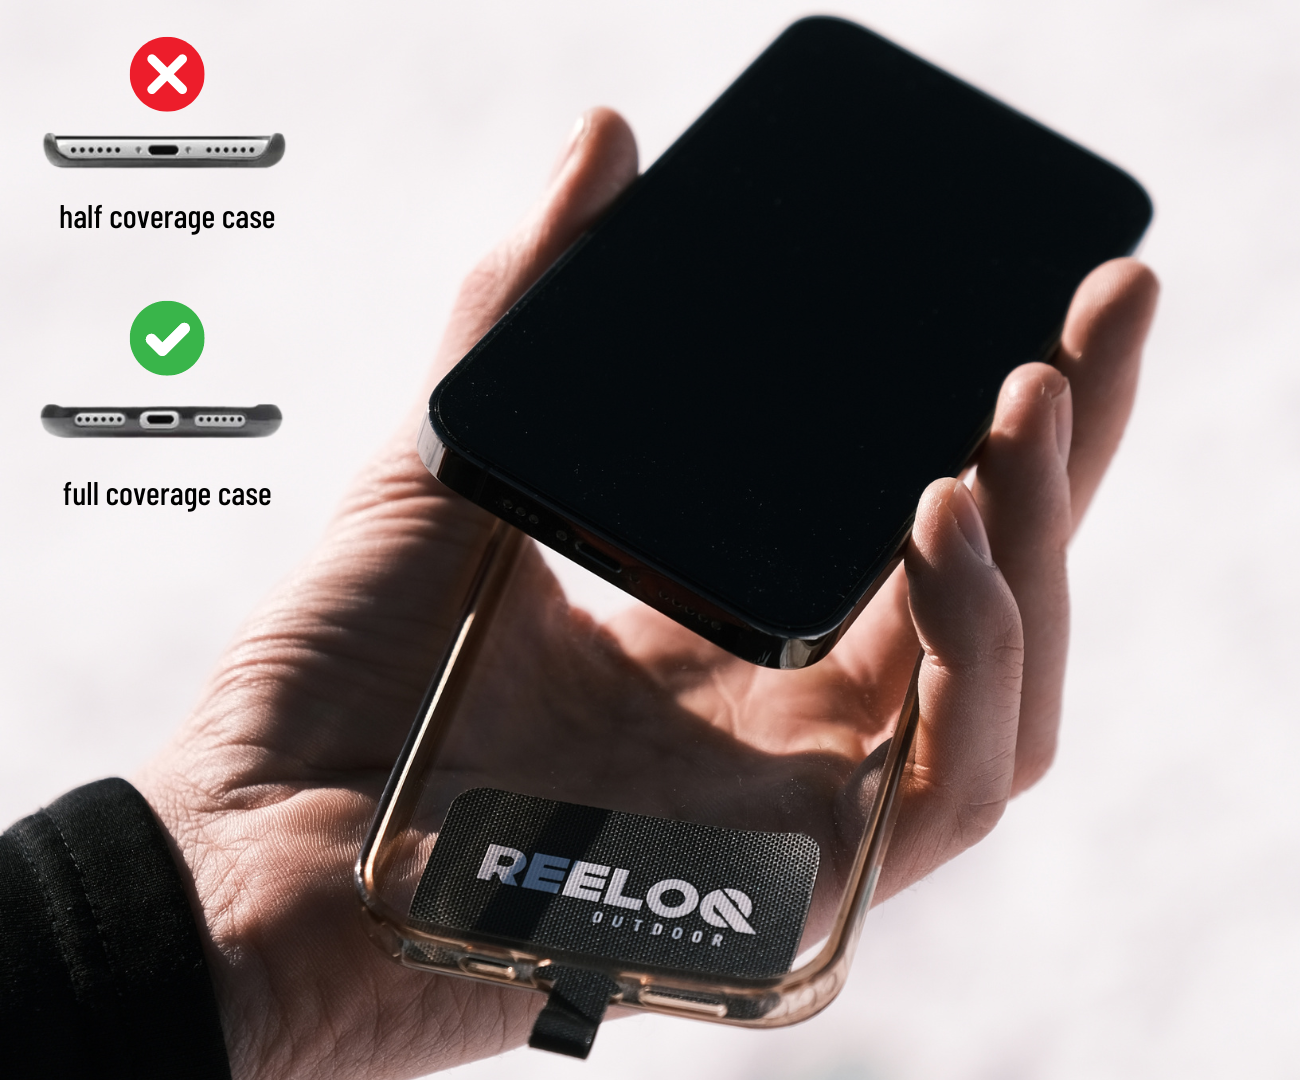 REELOQ PRO Smartphone Securing